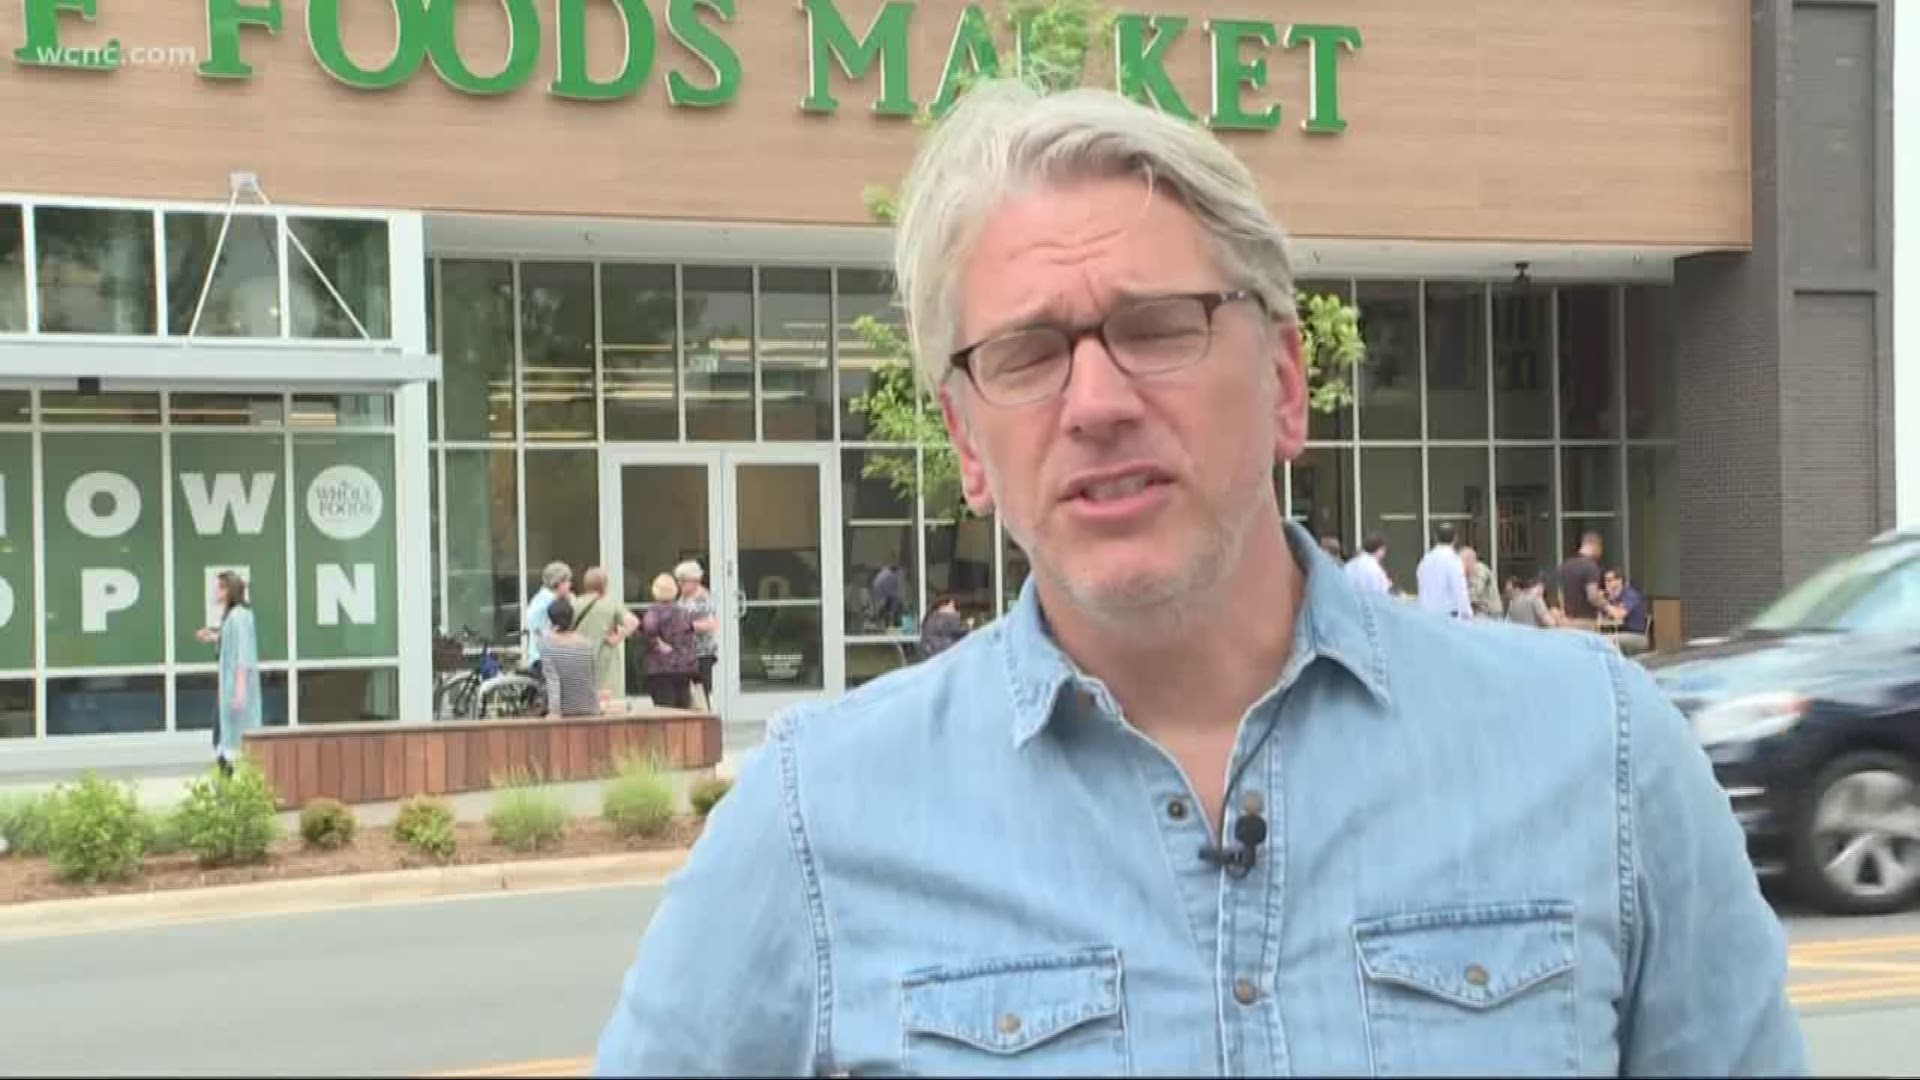 A new grocery store in uptown Charlotte is turning heads and drawing massive crowds.